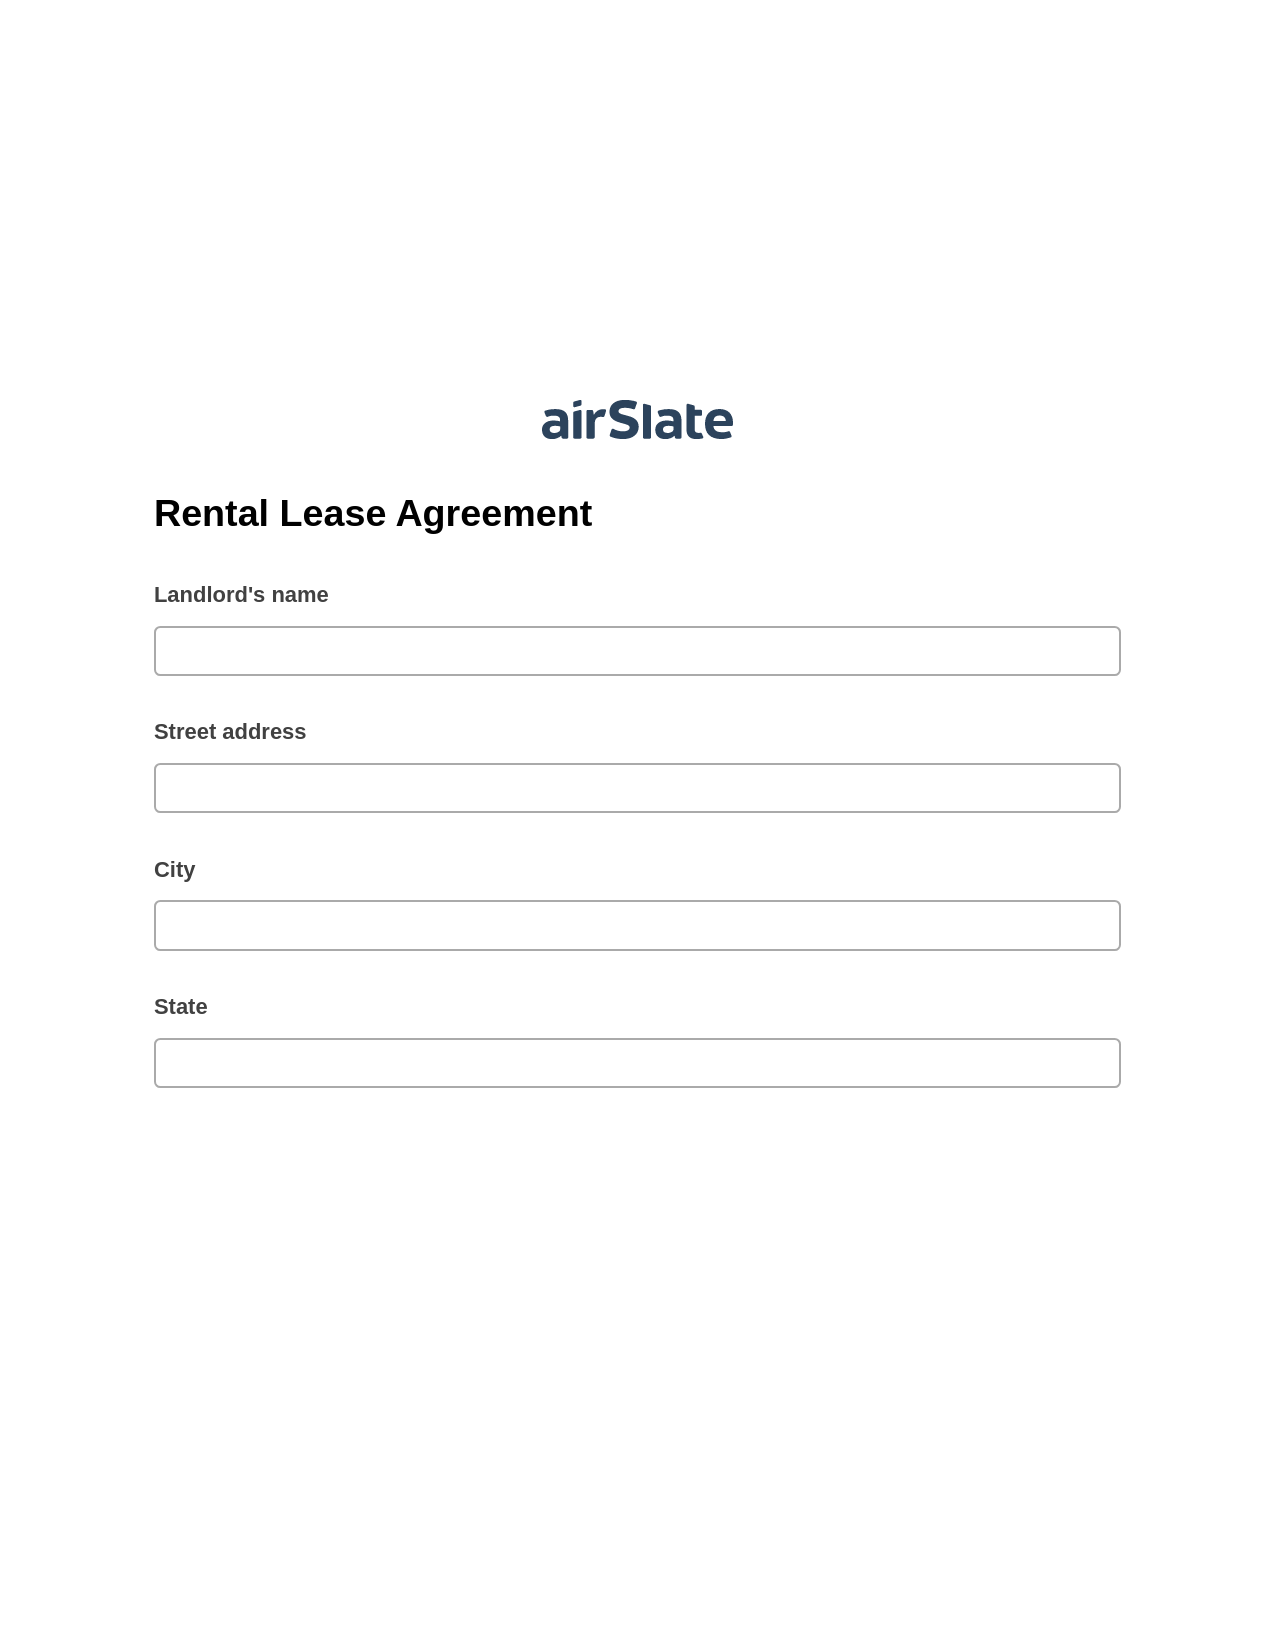 Rental Lease Agreement Pre-fill Dropdowns from Office 365 Excel Bot, Google Cloud Print Bot, Post-finish Document Bot